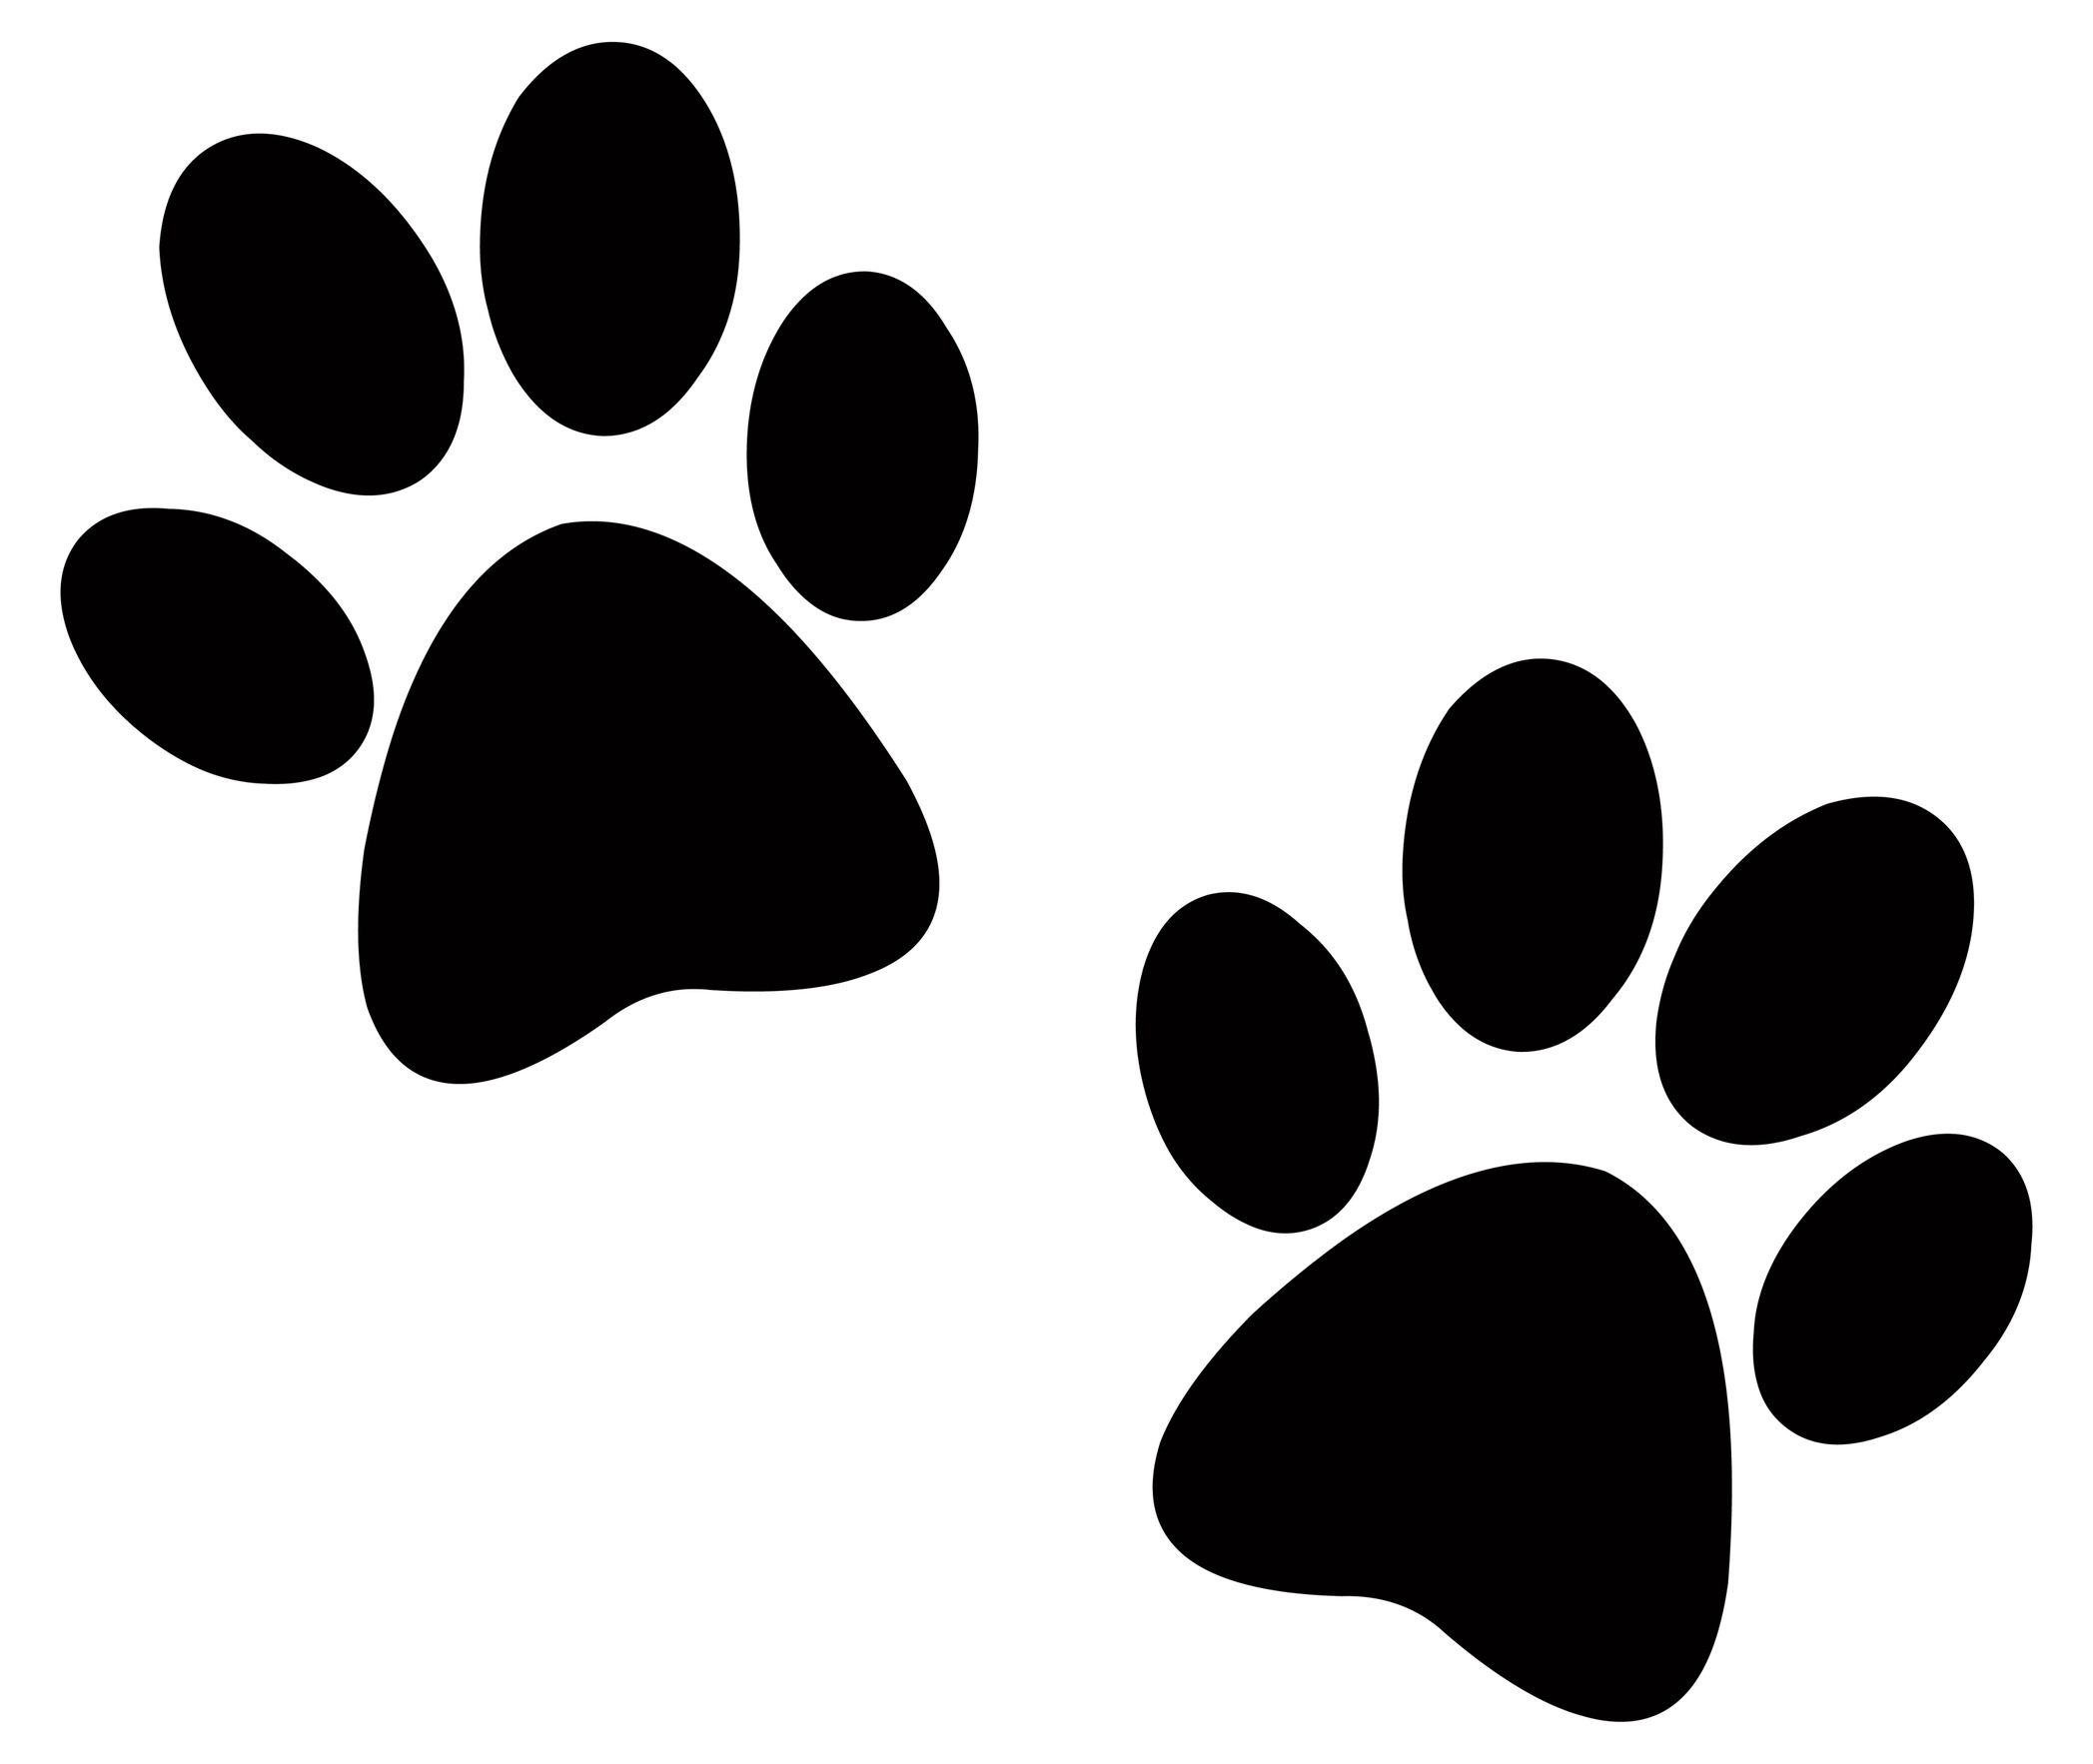 Paw print black and white clipart kid